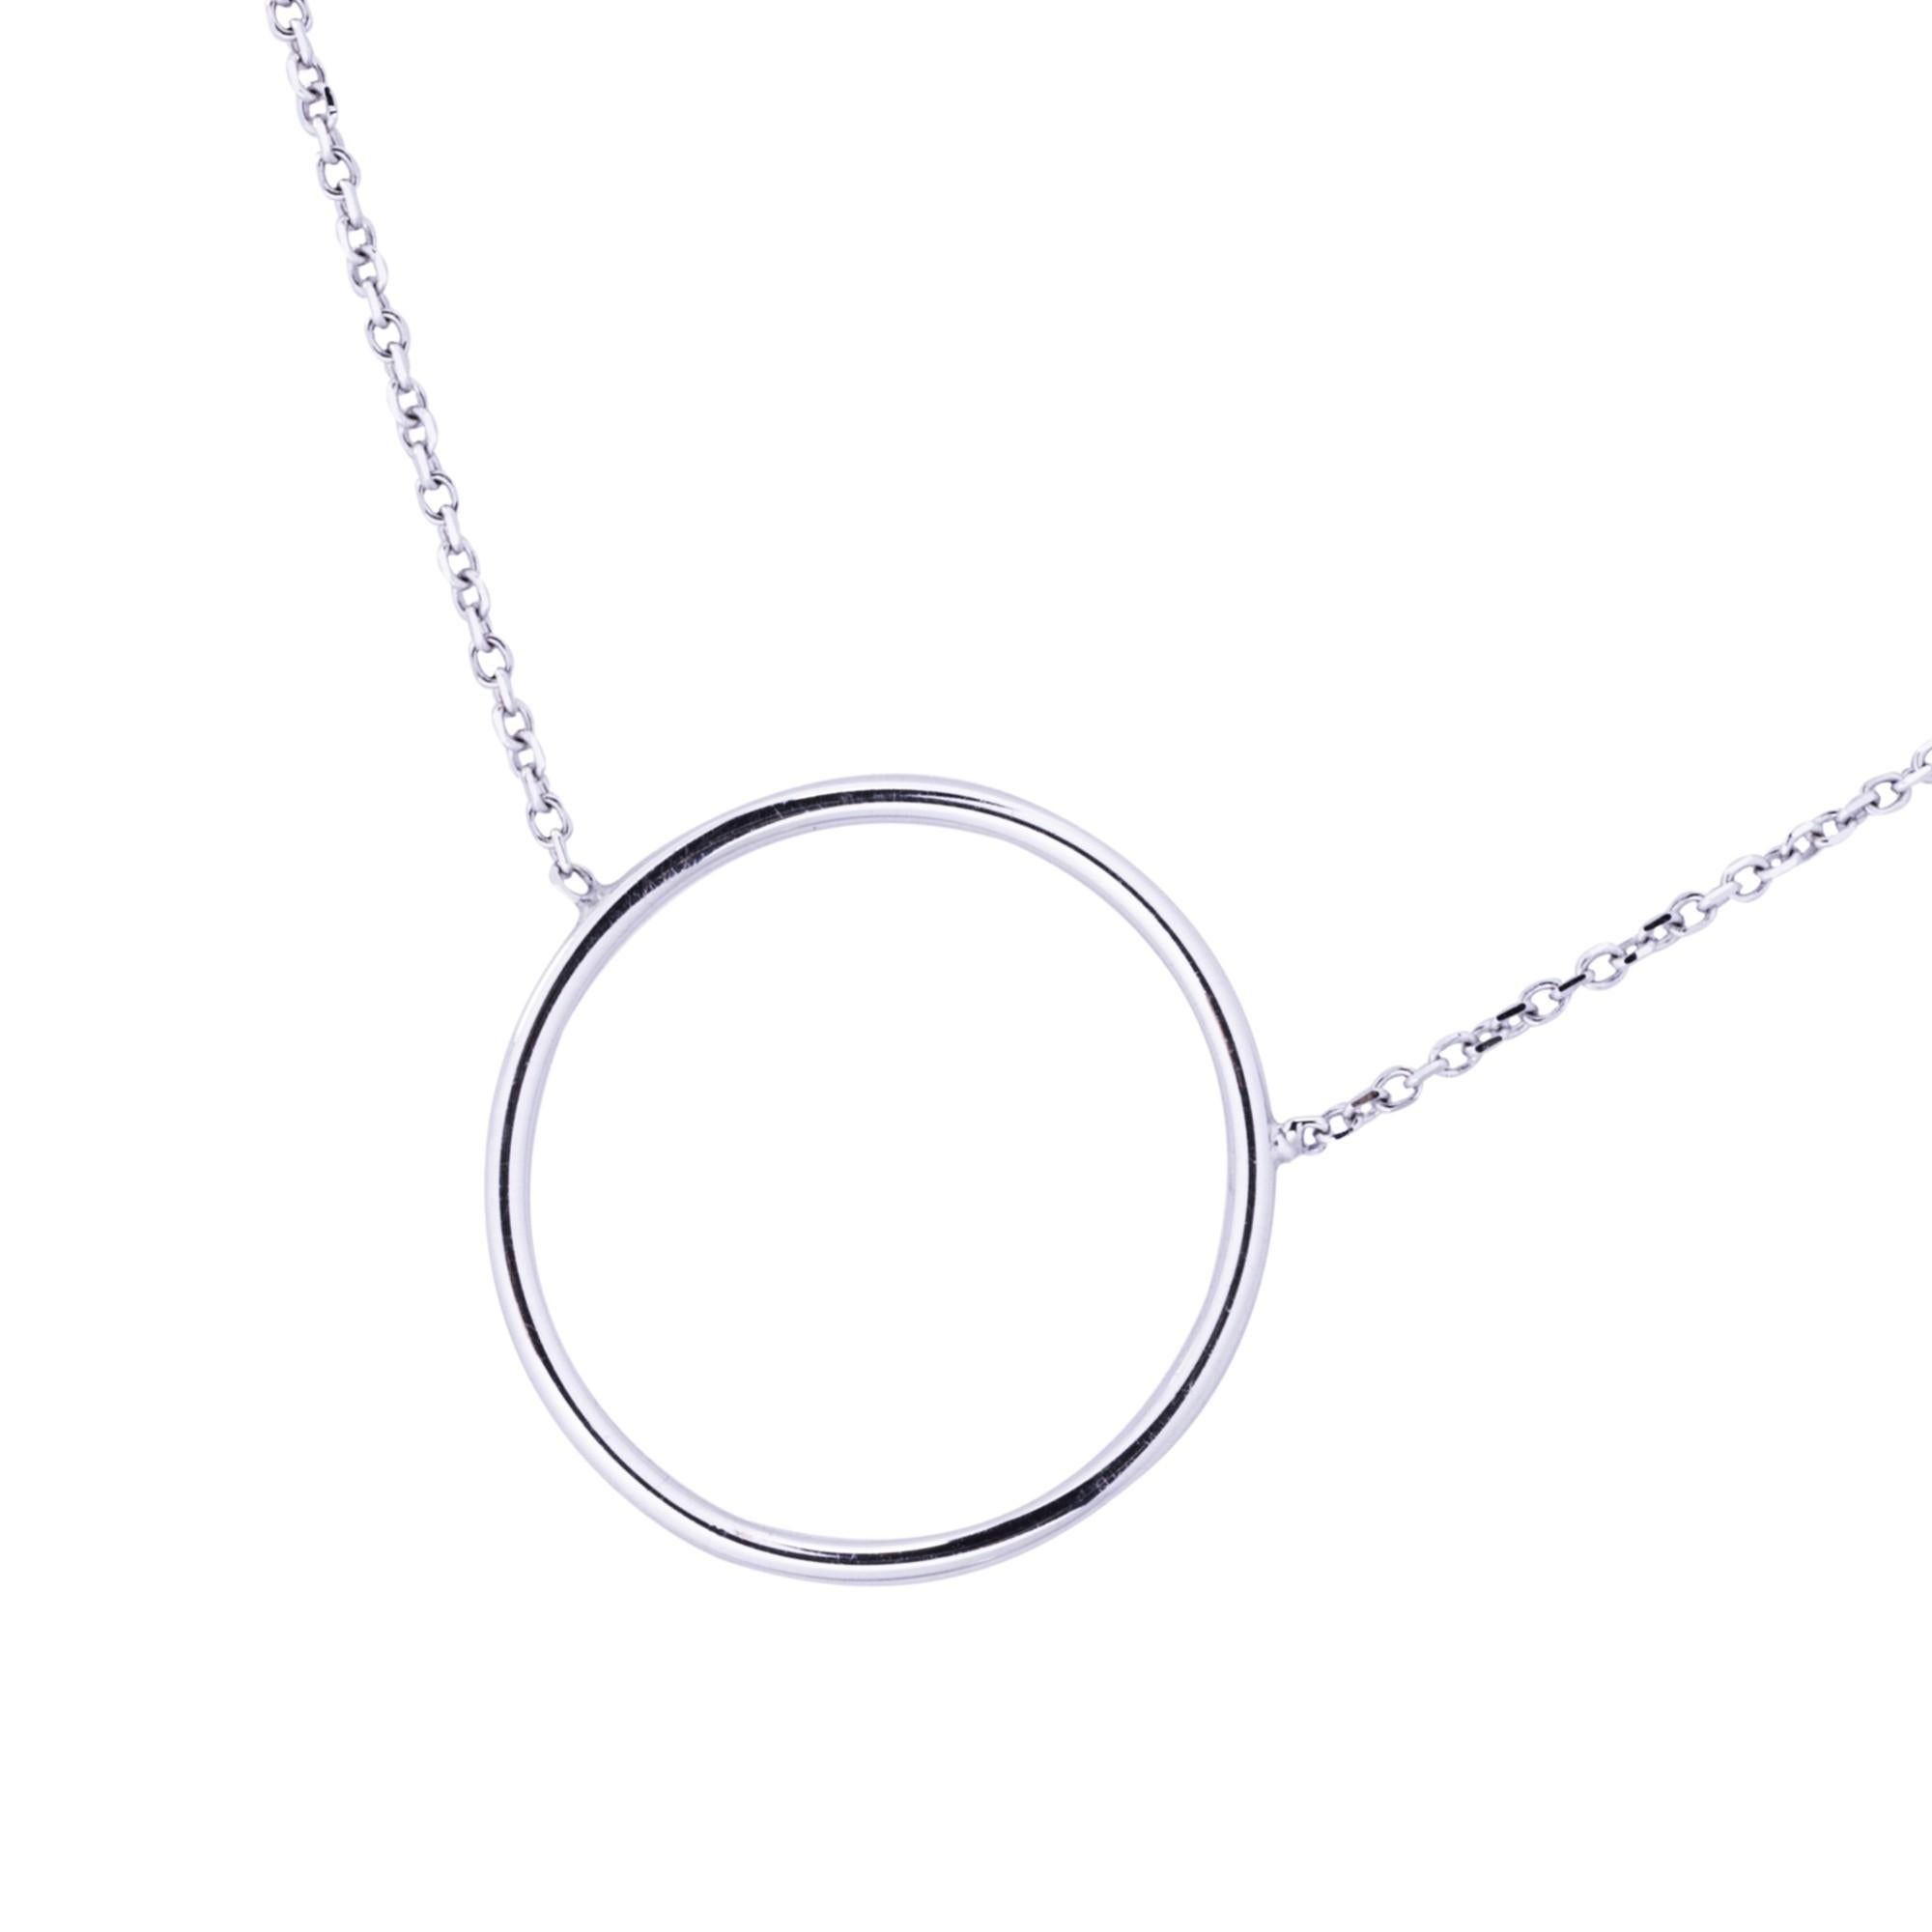 Alex Jona 18 Karat White Gold Hoop Chain Necklace In New Condition For Sale In Torino, IT